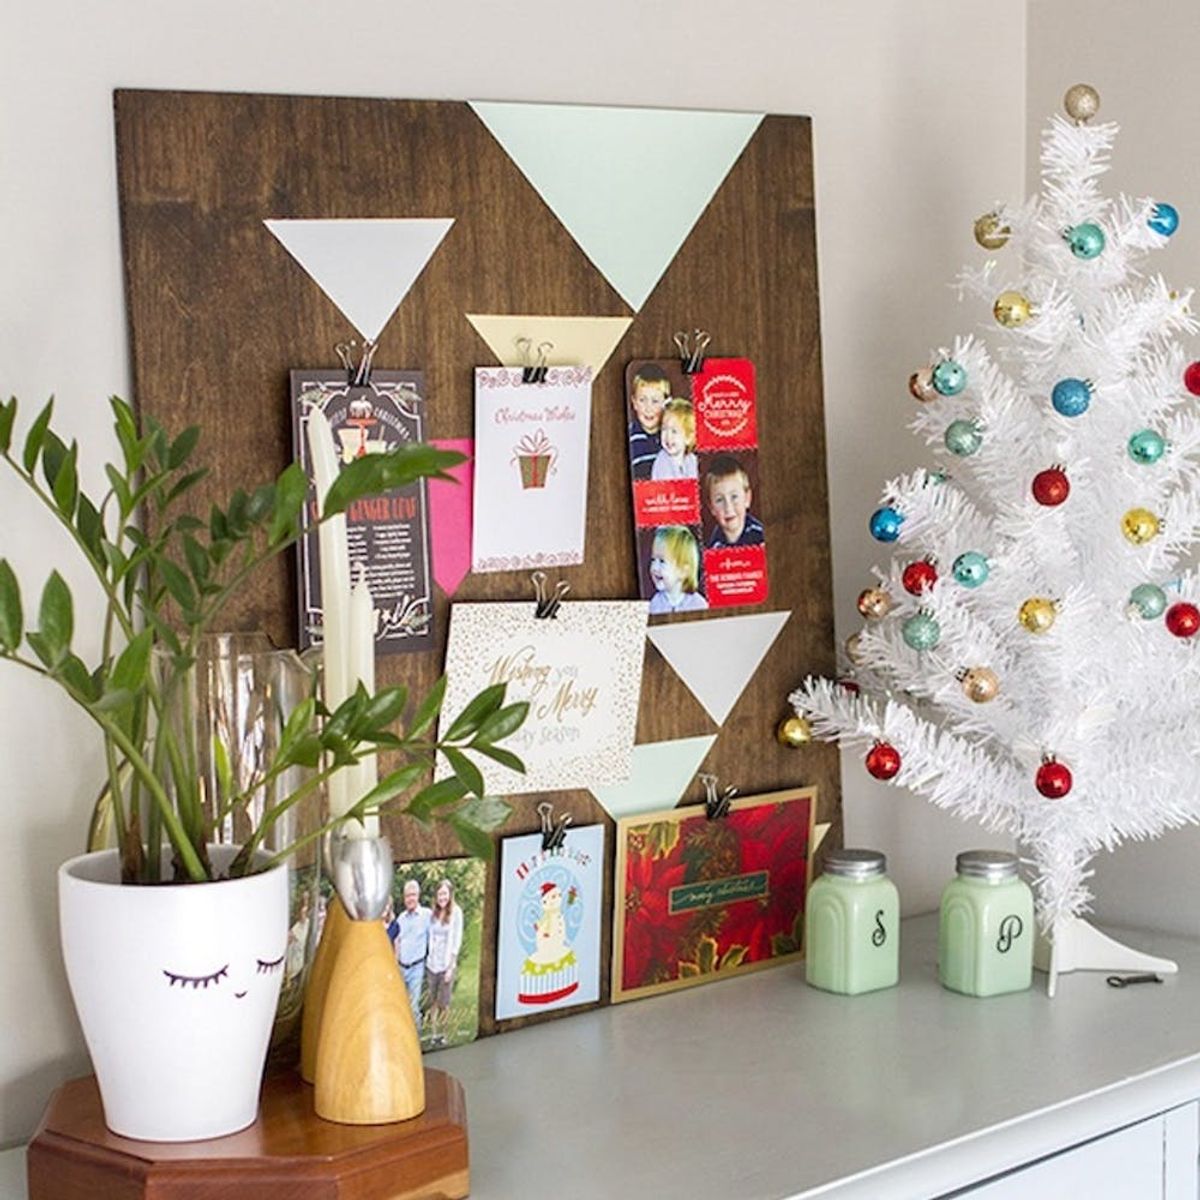 12 Cool Ways to Display Your Christmas Cards